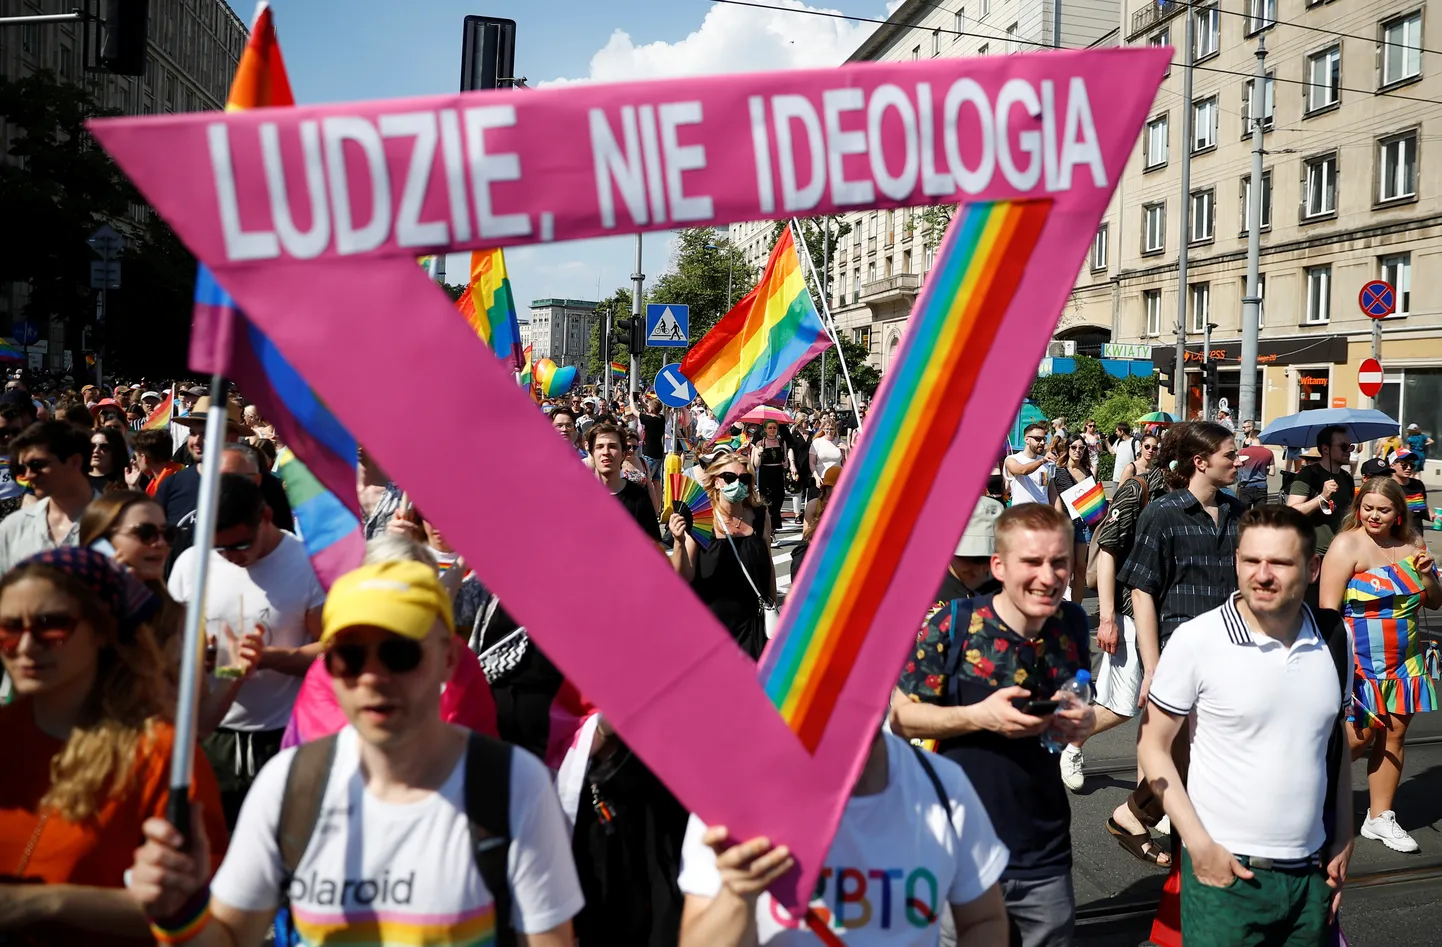 People attend the "Equality Parade" rally in support of the LGBT community, in Warsaw, Poland June 19, 2021. The writing reads: "People, not ideology". REUTERS/Kacper Pempel